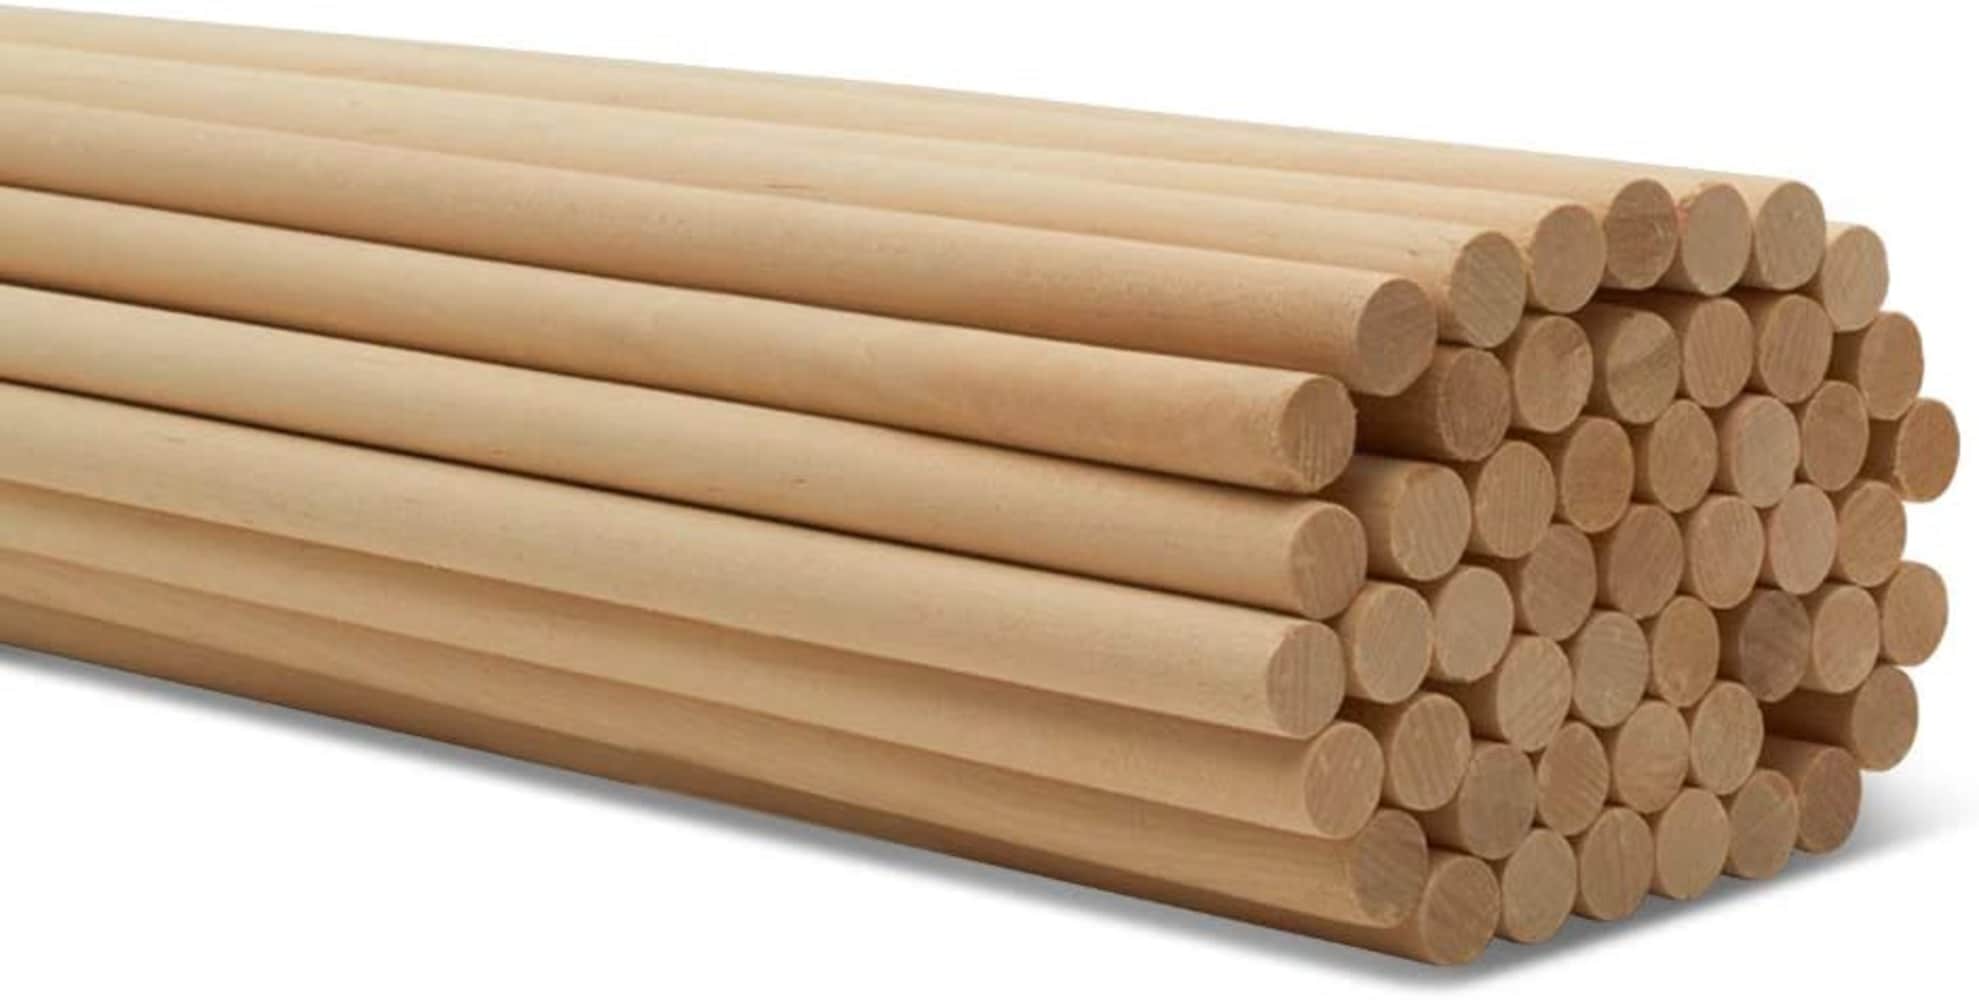 25 Pack Square Dowel Rods, Unfinished Wood Sticks for Crafting, 1